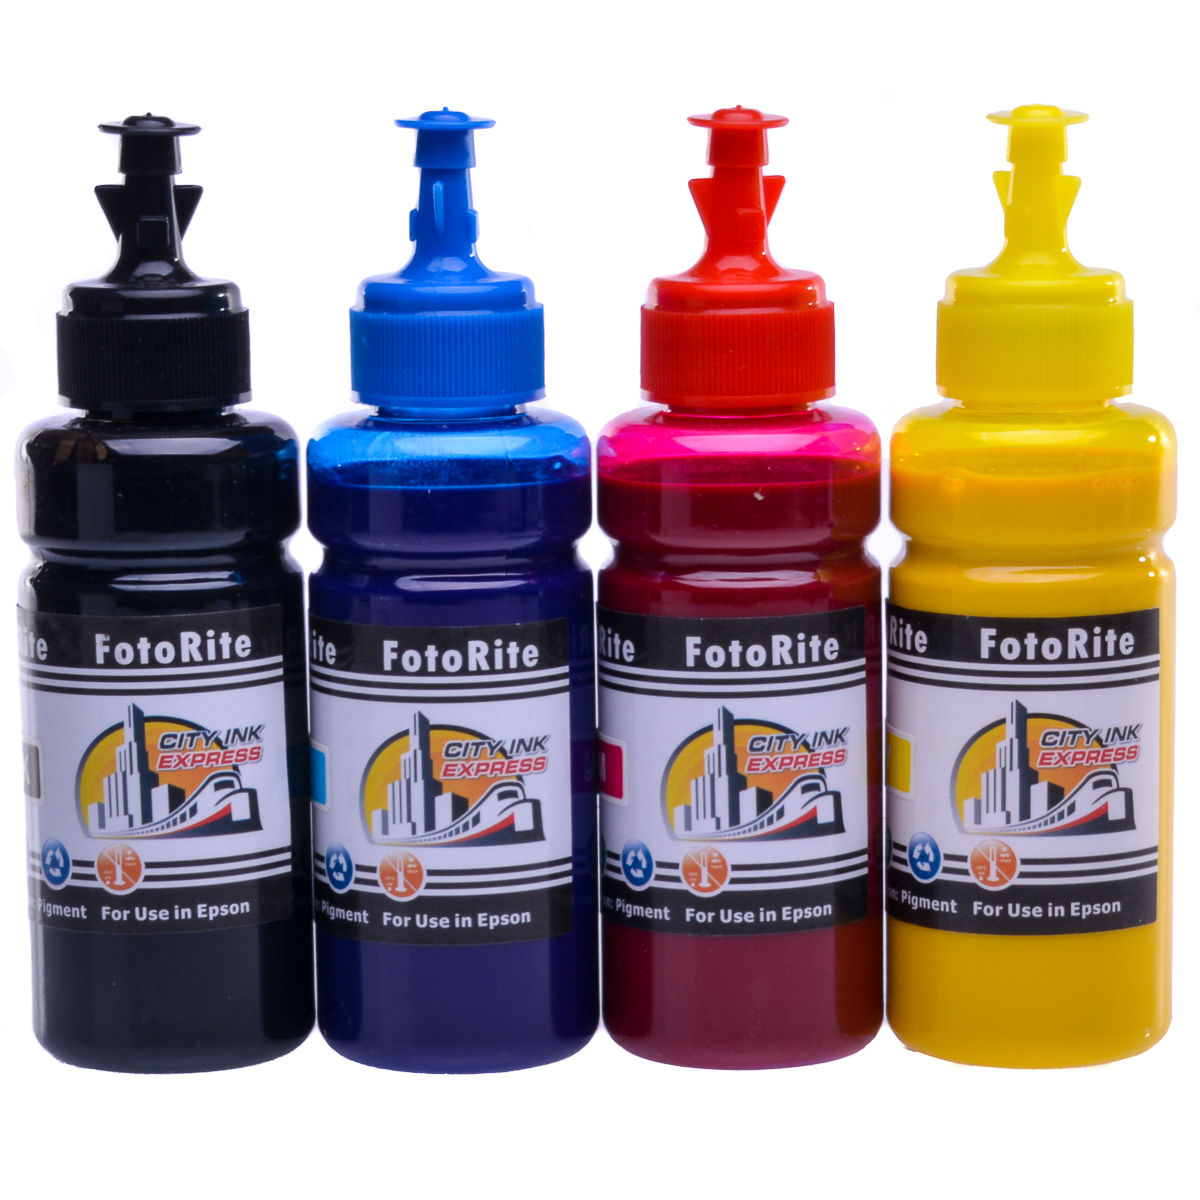 Cheap Multipack pigment ink refill replaces Epson ET-16680